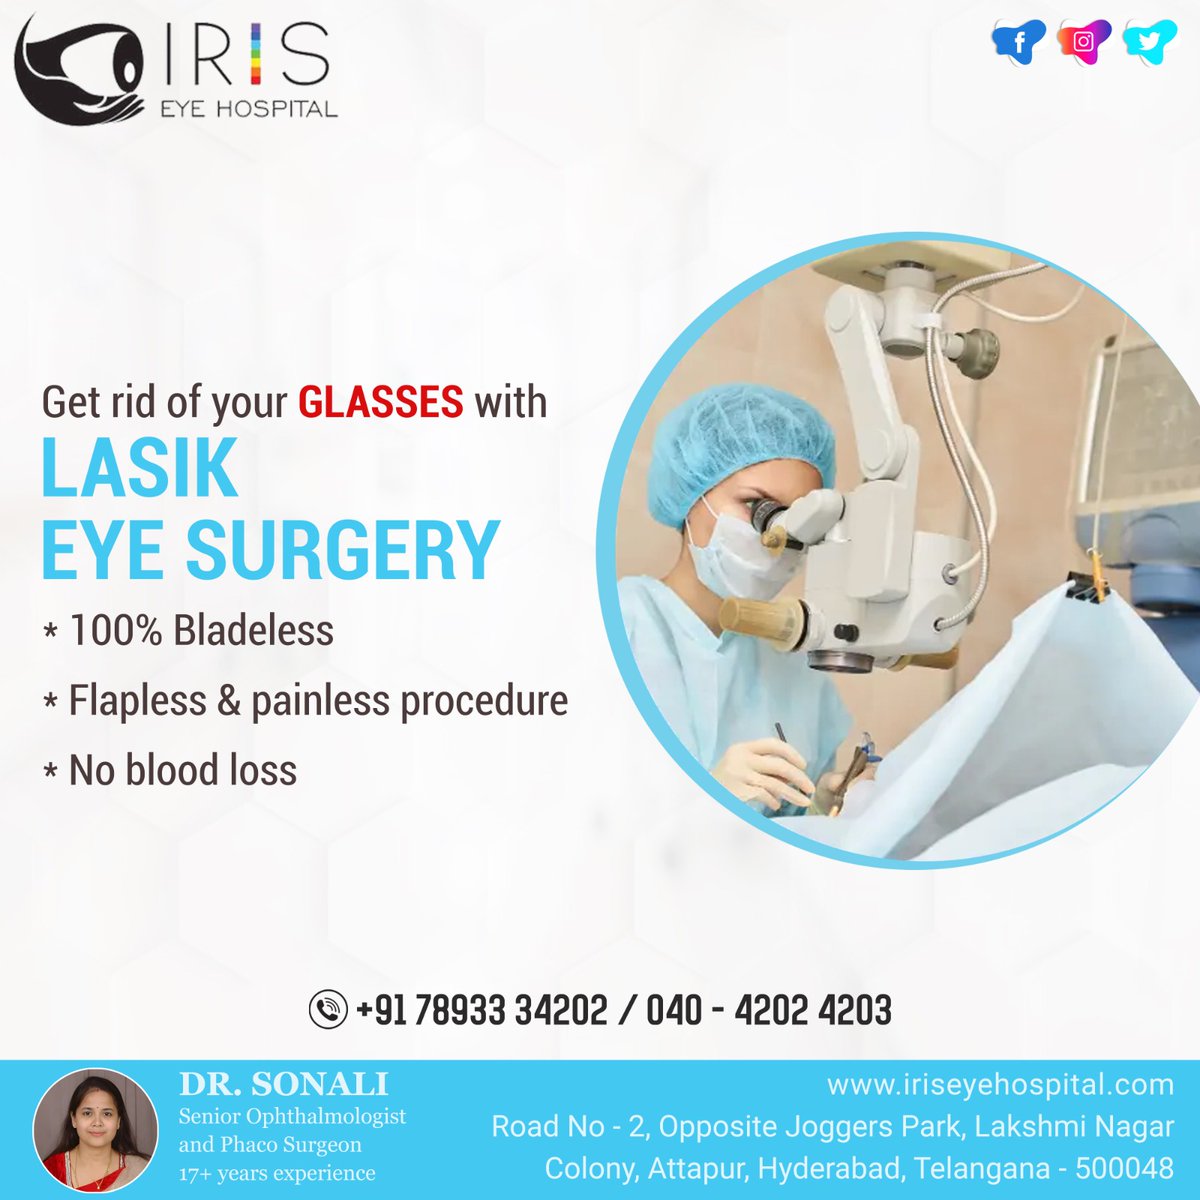 Transform your #vision! #LASIK: Bladeless, flapless, painless. #100% safe. No blood loss. Experience clarity without #glasses. Book your consultation now!

#DrSonali #Ophthalmologist #EyeSurgeon #IrisHospital #Attapur #Telangana #AdvancedCataractSurgery